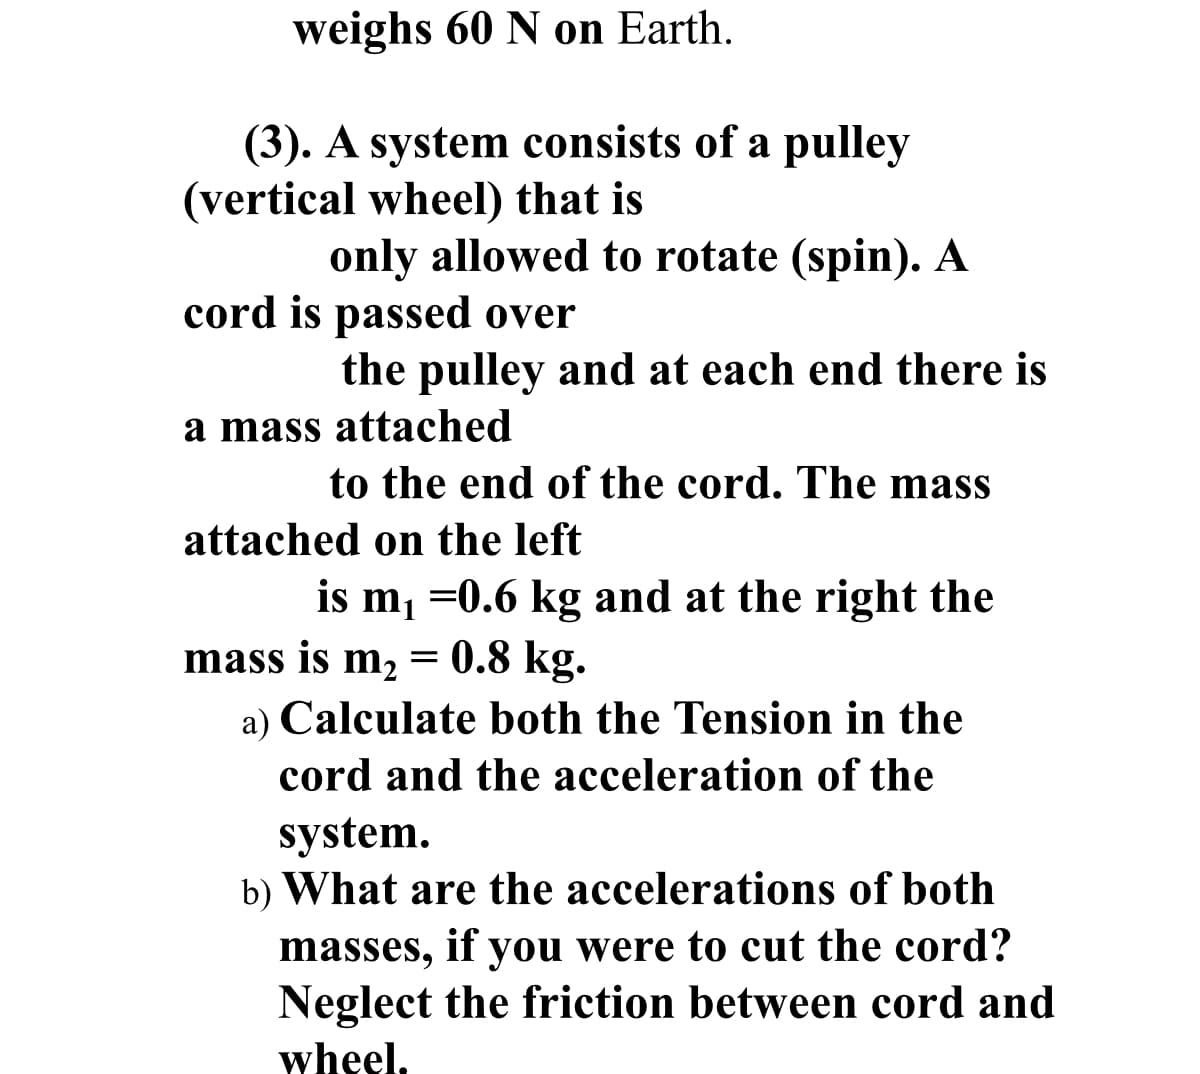 weighs 60 N on Earth.
(3). A system consists of a pulley
(vertical wheel) that is
only allowed to rotate (spin). A
cord is passed over
the pulley and at each end there is
a mass attached
to the end of the cord. The mass
attached on the left
is m, =0.6 kg and at the right the
mass is m2 = 0.8 kg.
a) Calculate both the Tension in the
cord and the acceleration of the
system.
b) What are the accelerations of both
masses, if you were to cut the cord?
Neglect the friction between cord and
wheel,
